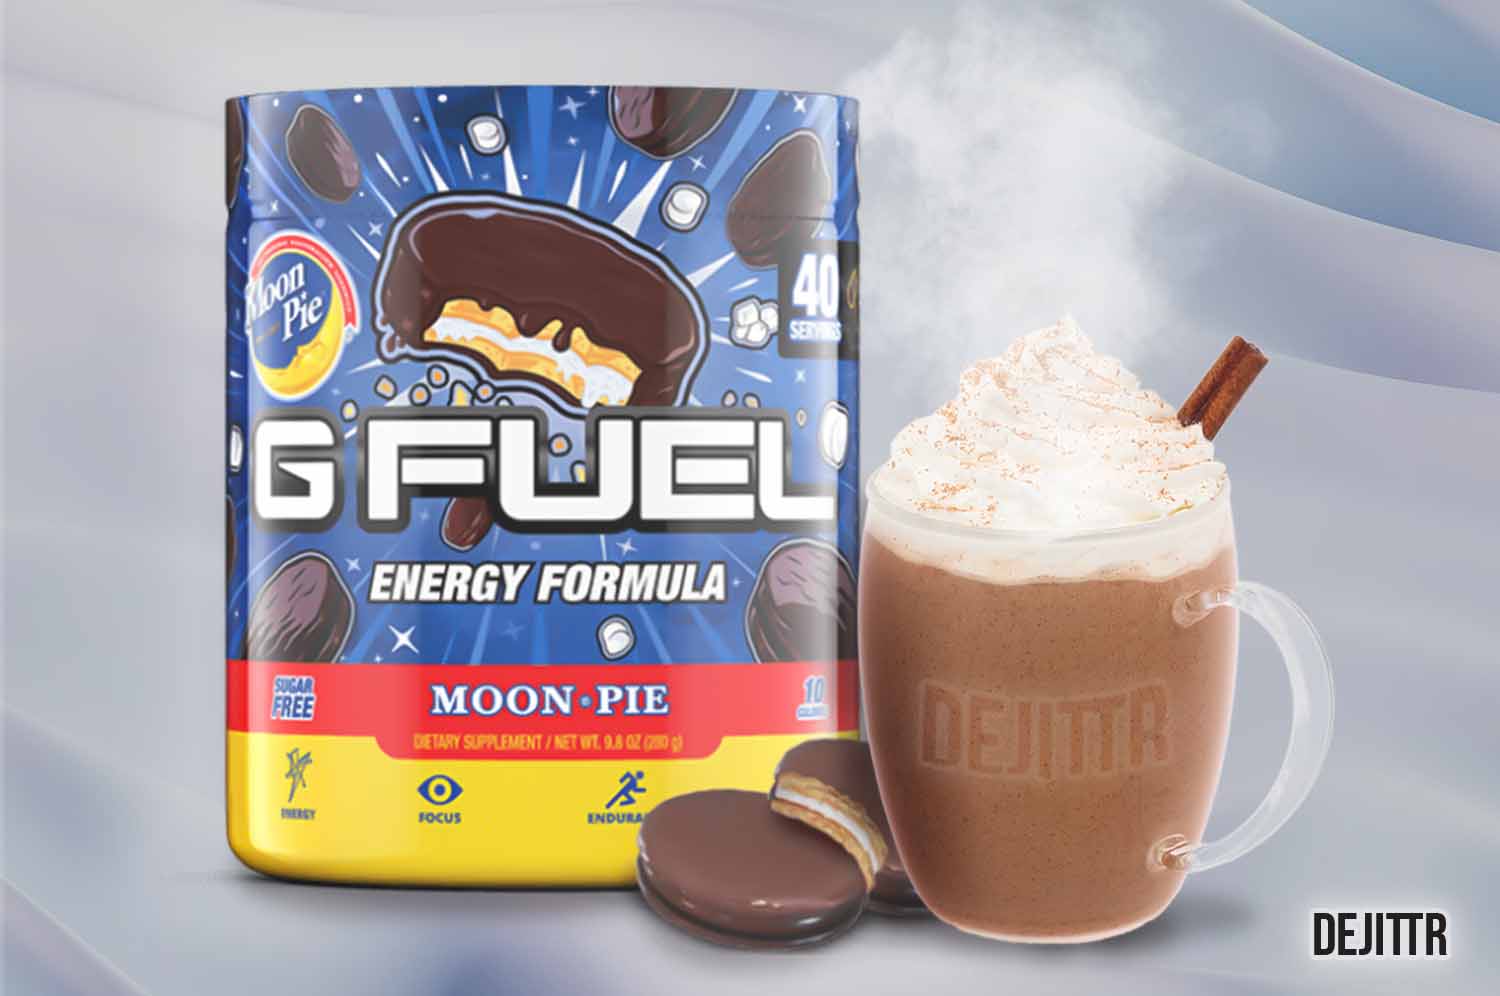 Tub of G FUEL moon pie flavor with a glass mug filled with hot brown beverage with whip cream on top with cinnamon stick